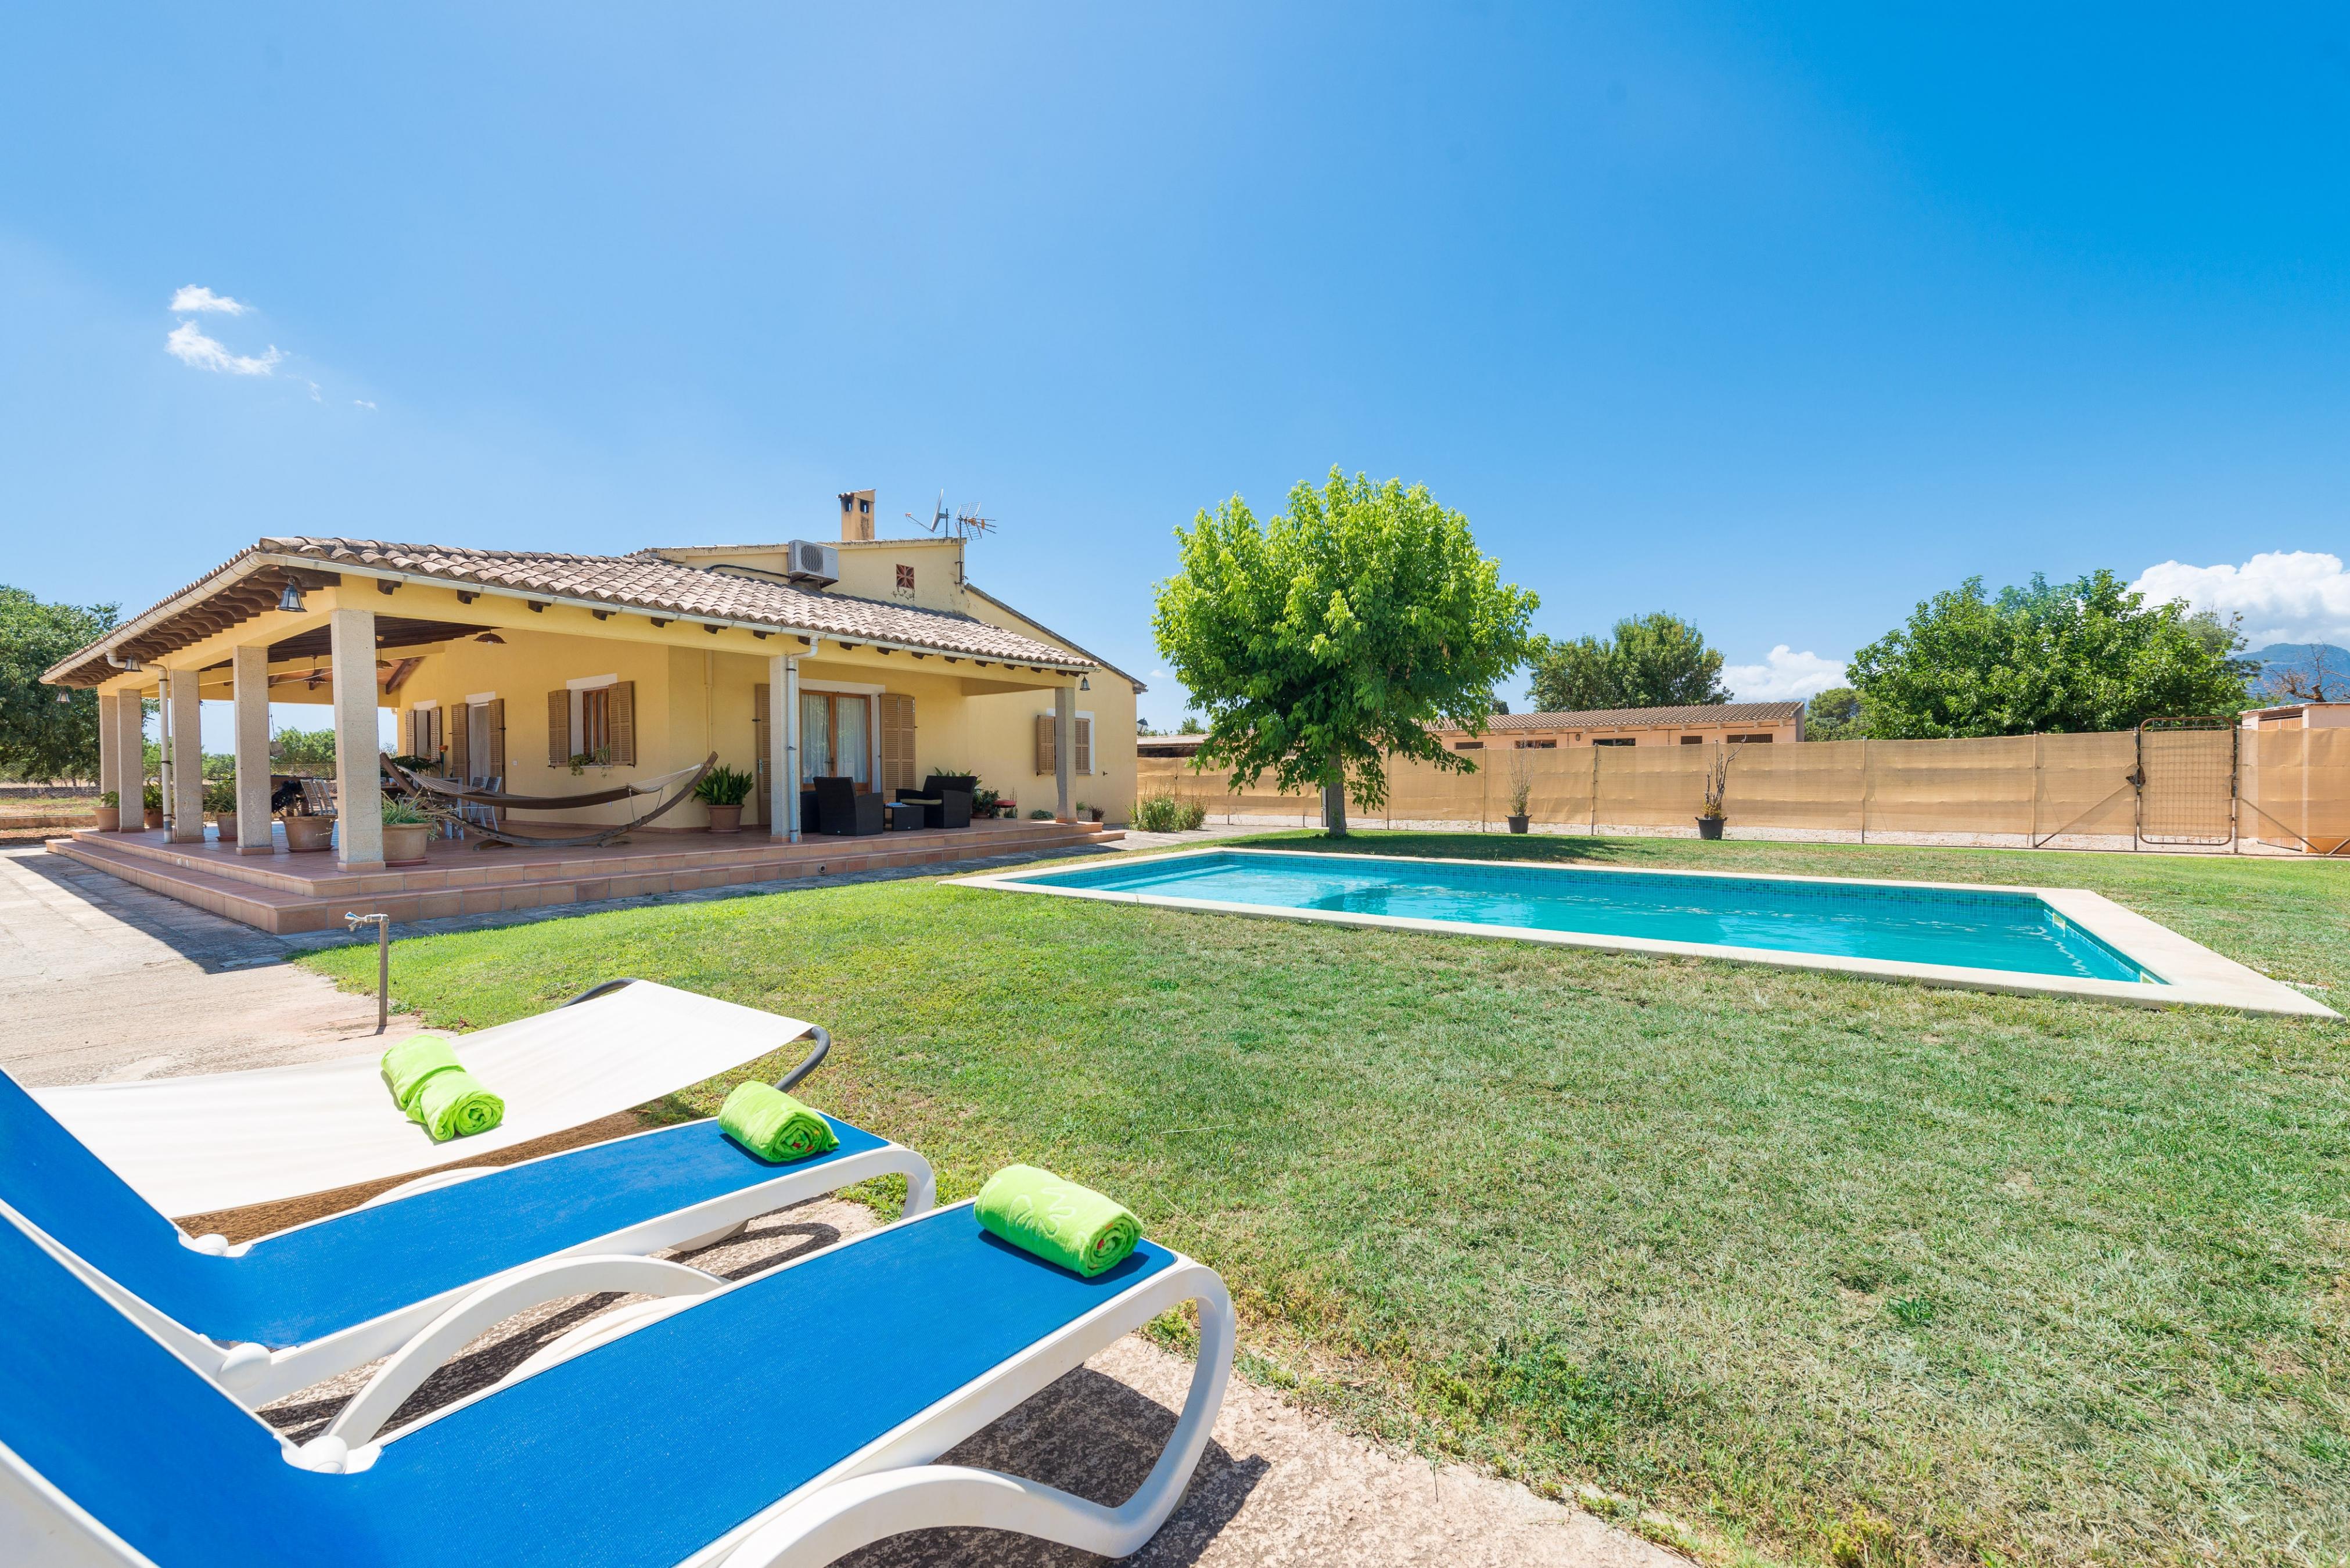 Property Image 1 - CAN FERRADURA - Charming villa with private pool in the countryside. Free WiFi.